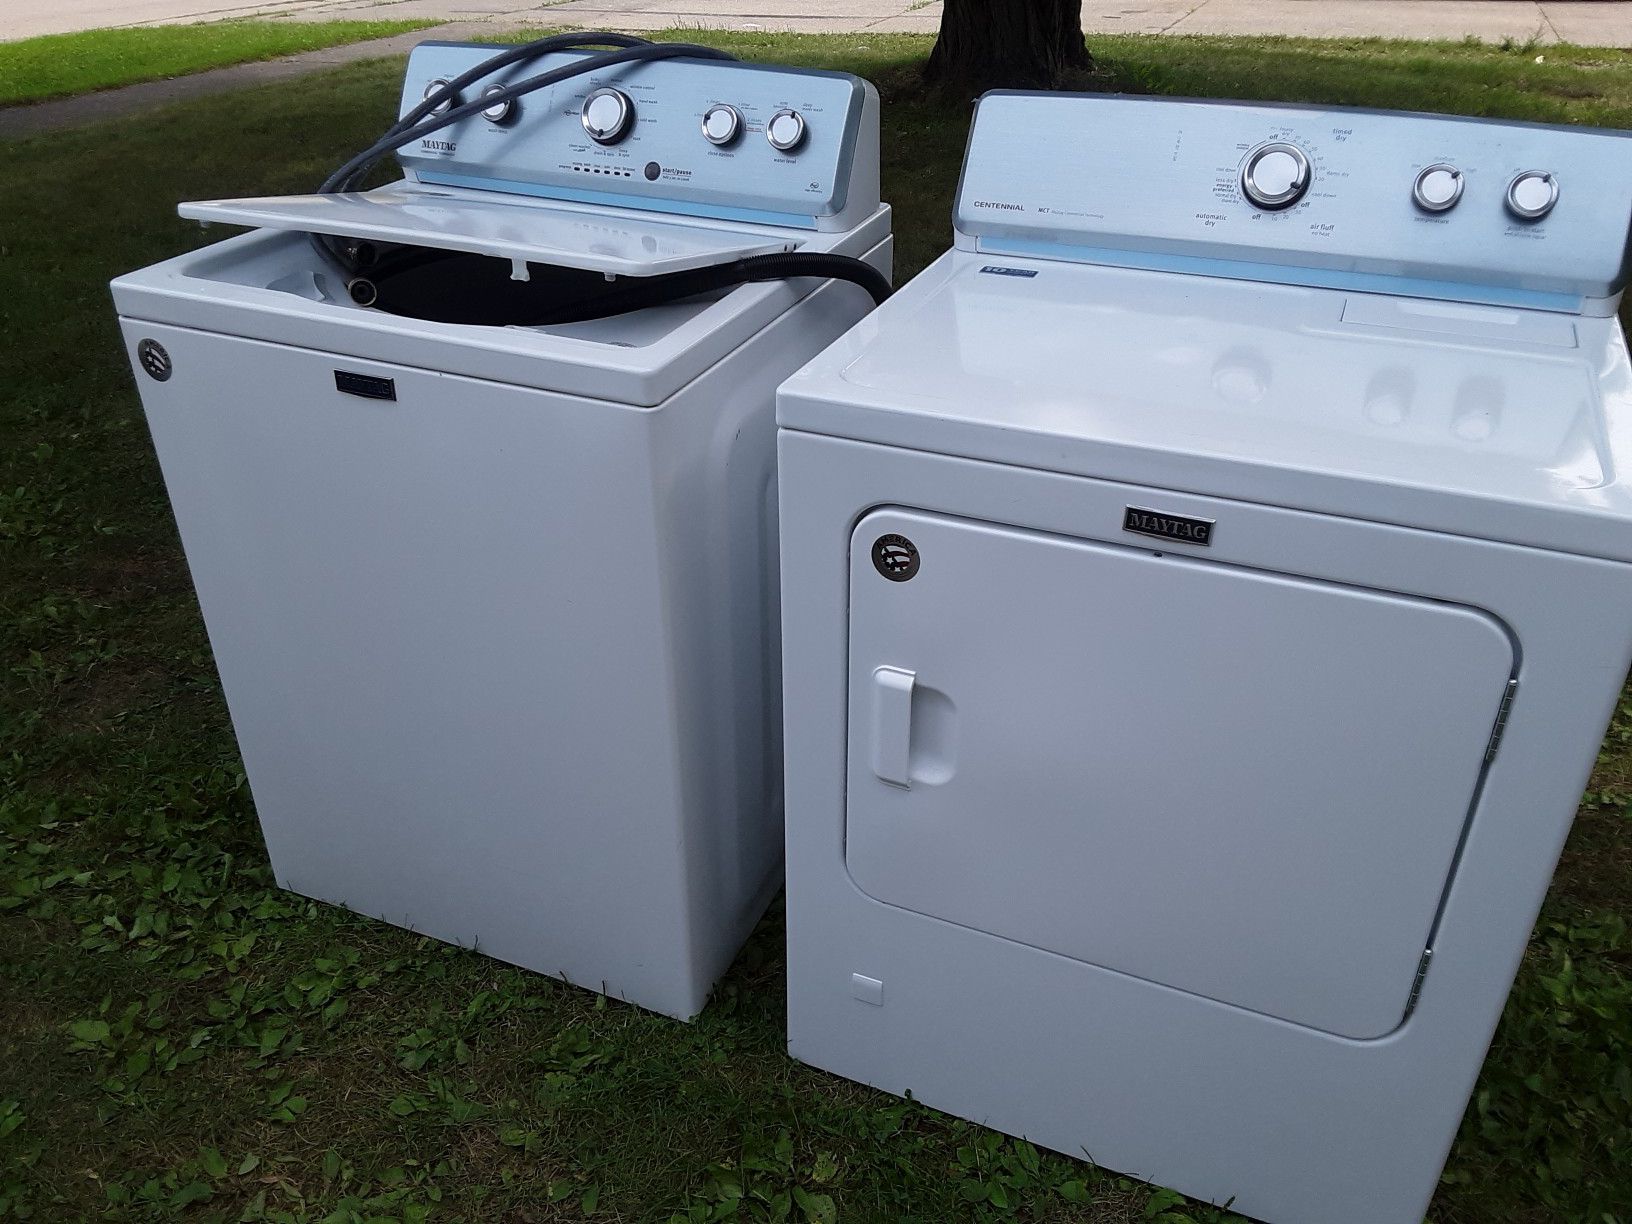 MAYTAG-high efficiency gas dryer and washer!